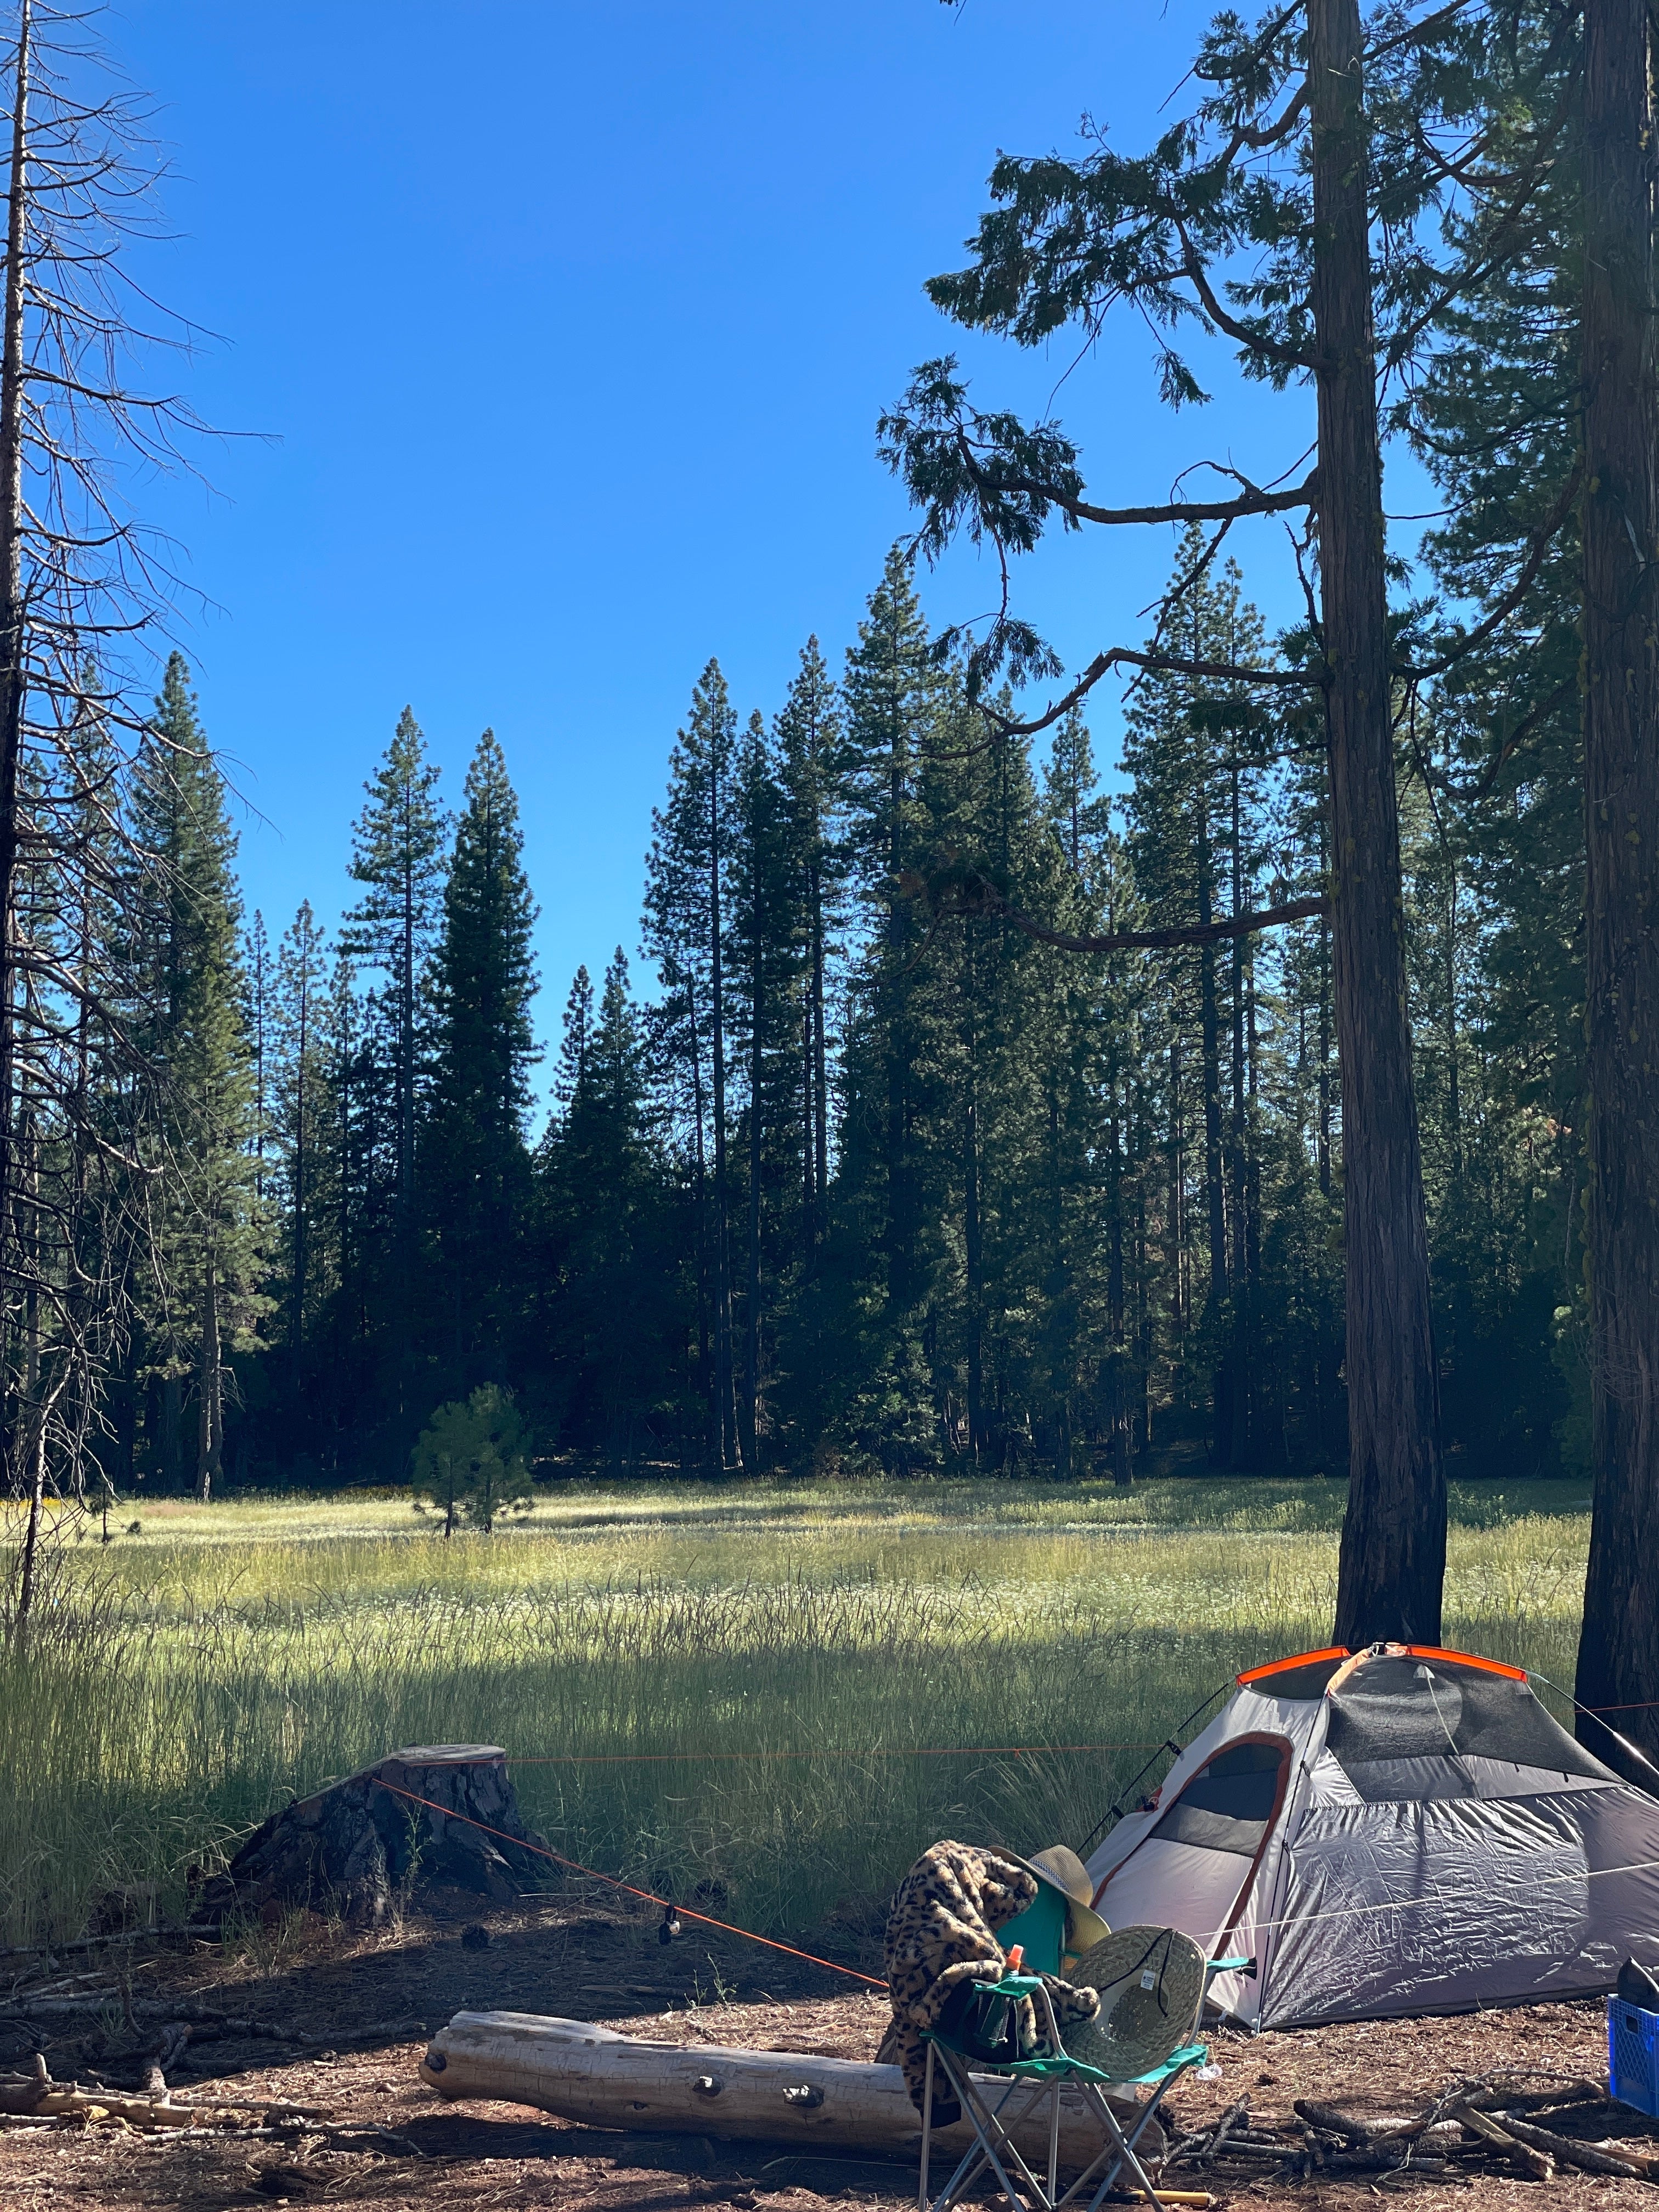 Camper submitted image from Tahoe National Forest Onion Valley Campground - 5